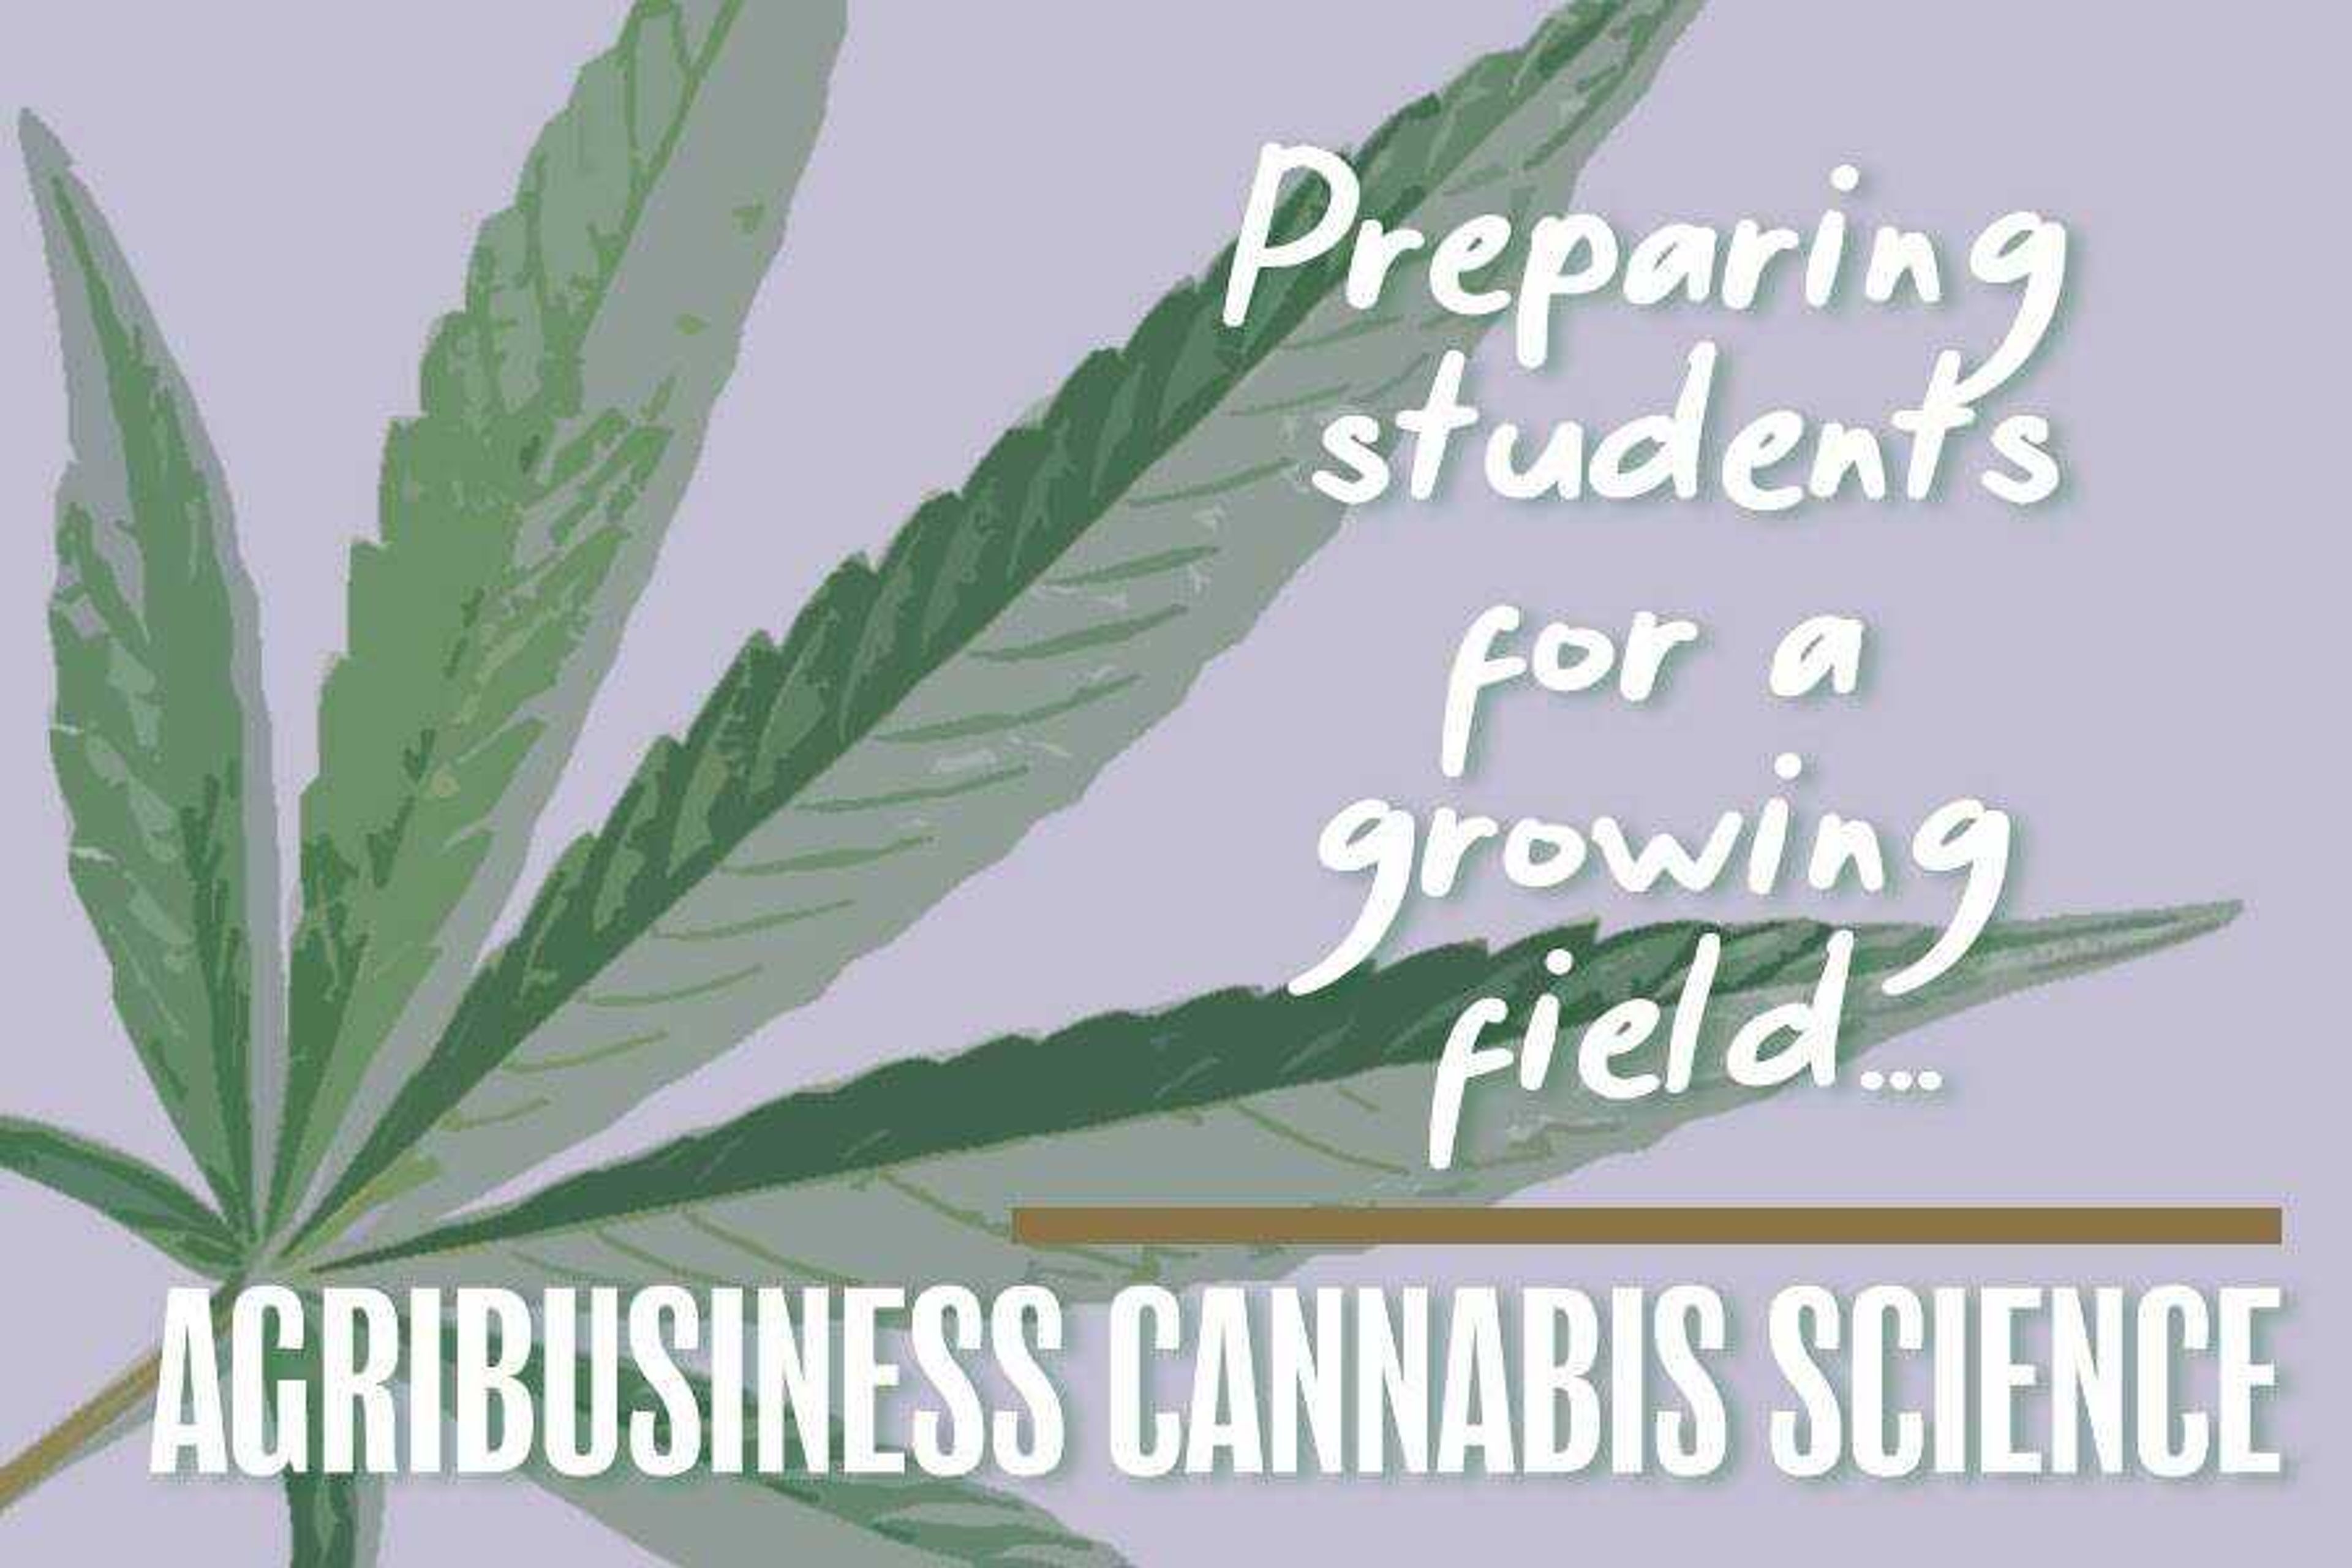 Agribusiness Cannabis Science major may come to Southeast